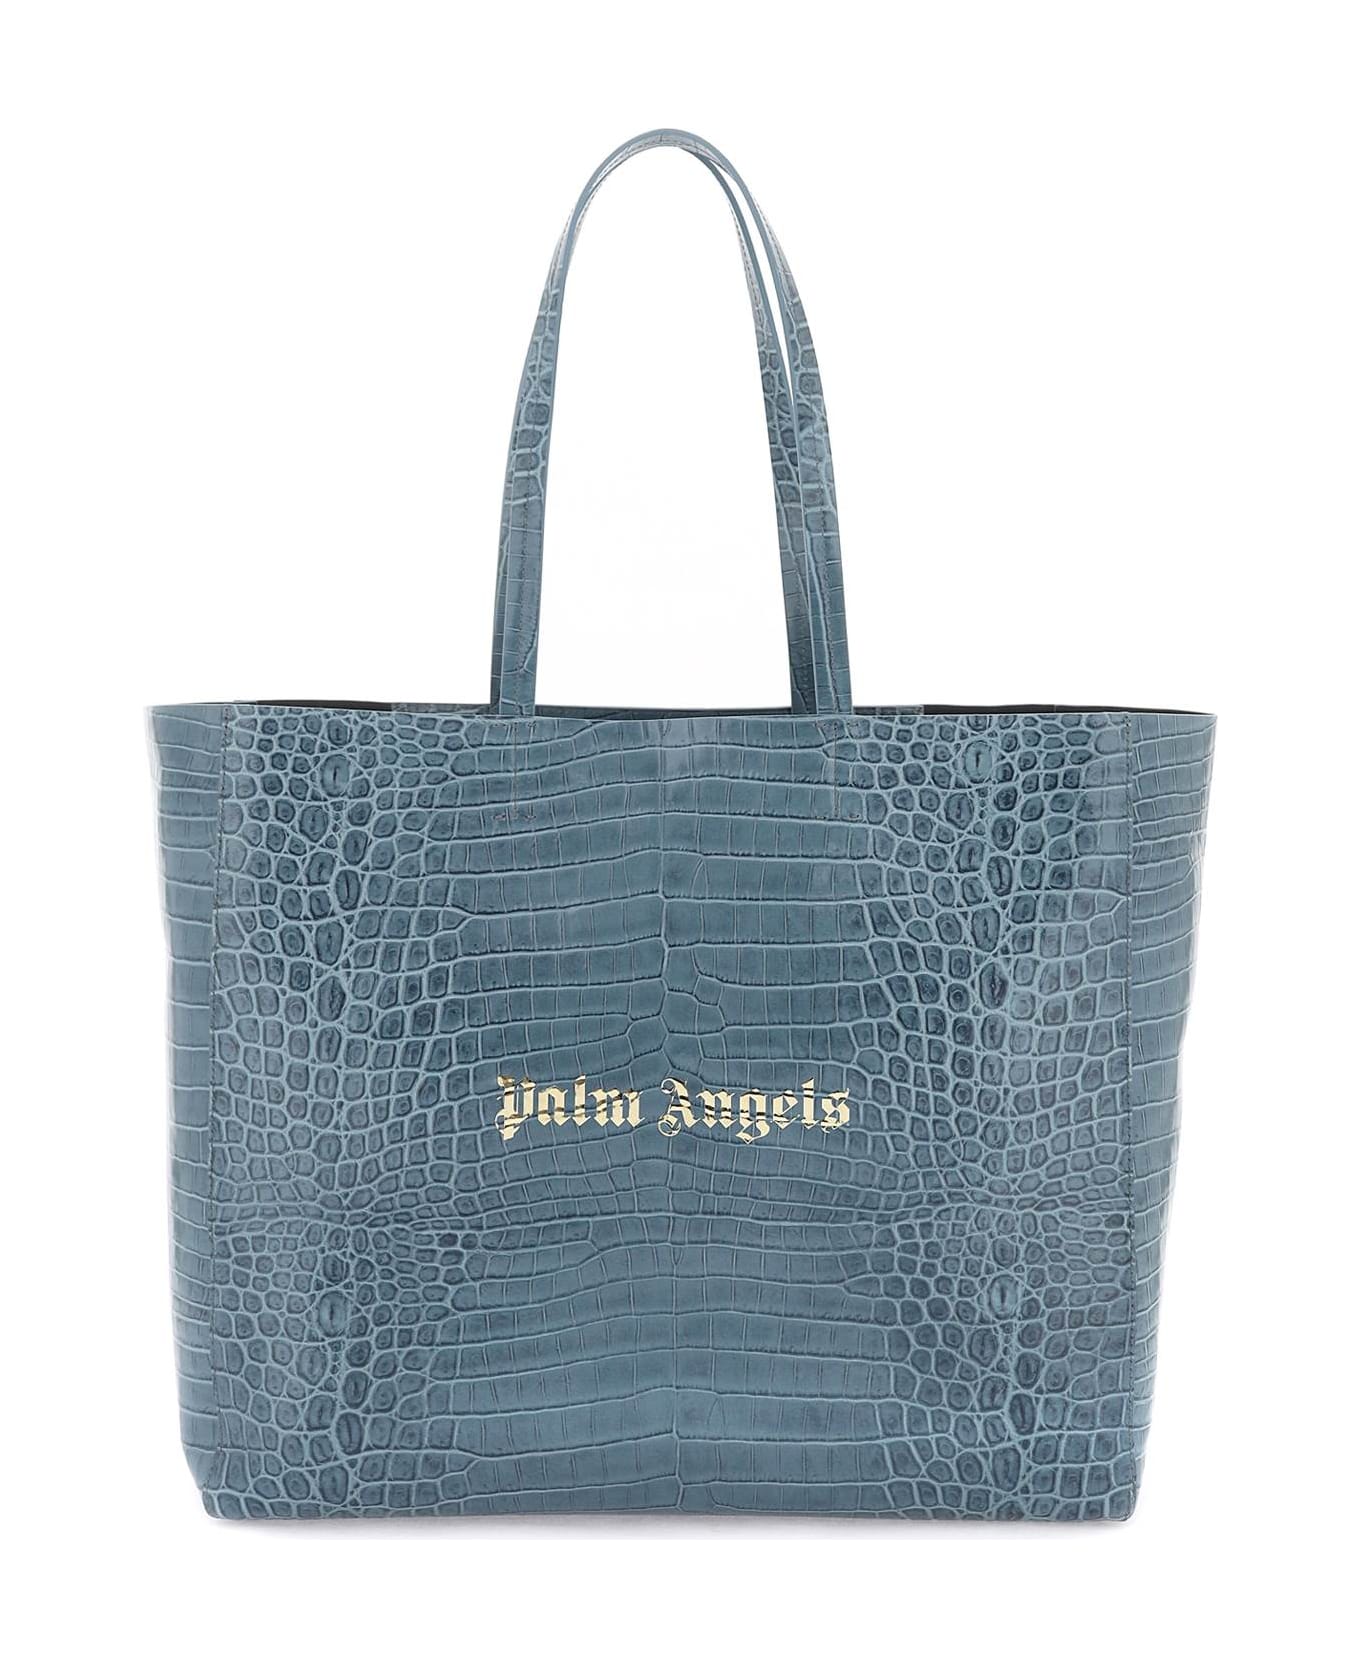 Palm Angels Leather Shopping Bag - BLUE GOLD (Light blue)